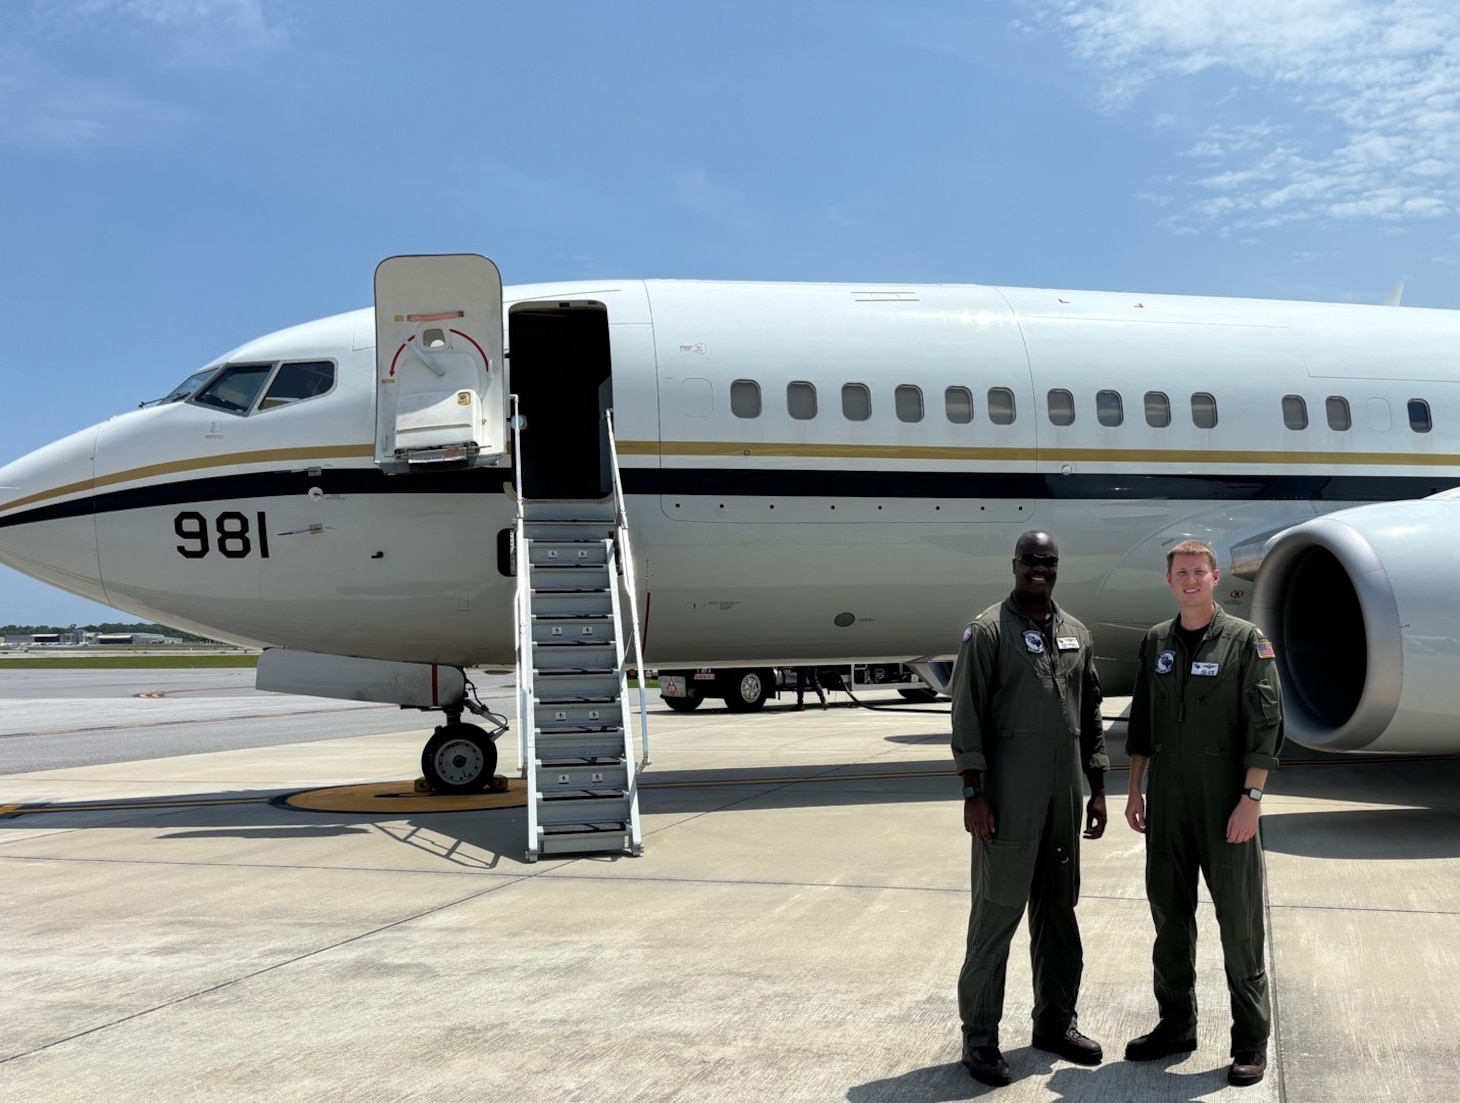 Lt. Cmdr. Diego McKnight (left) and Lt. Cmdr. Mike Carr (right) pose for a photo in front of the C-40 aircraft upon landing and disembarking the Naval Sea Cadets. Both pilots are Navy reservists that are also commercial pilots for American Airlines and FedEx respectively. Fleet Logistics Support Squadron 59 (VR-59) is a logistics squadron that provides essential, responsive and flexible airlift in support of the Navy’s peacetime operations, combat missions, humanitarian assistance and disaster relief worldwide. (U.S. Navy photo by Lt. Ashley Hutson)